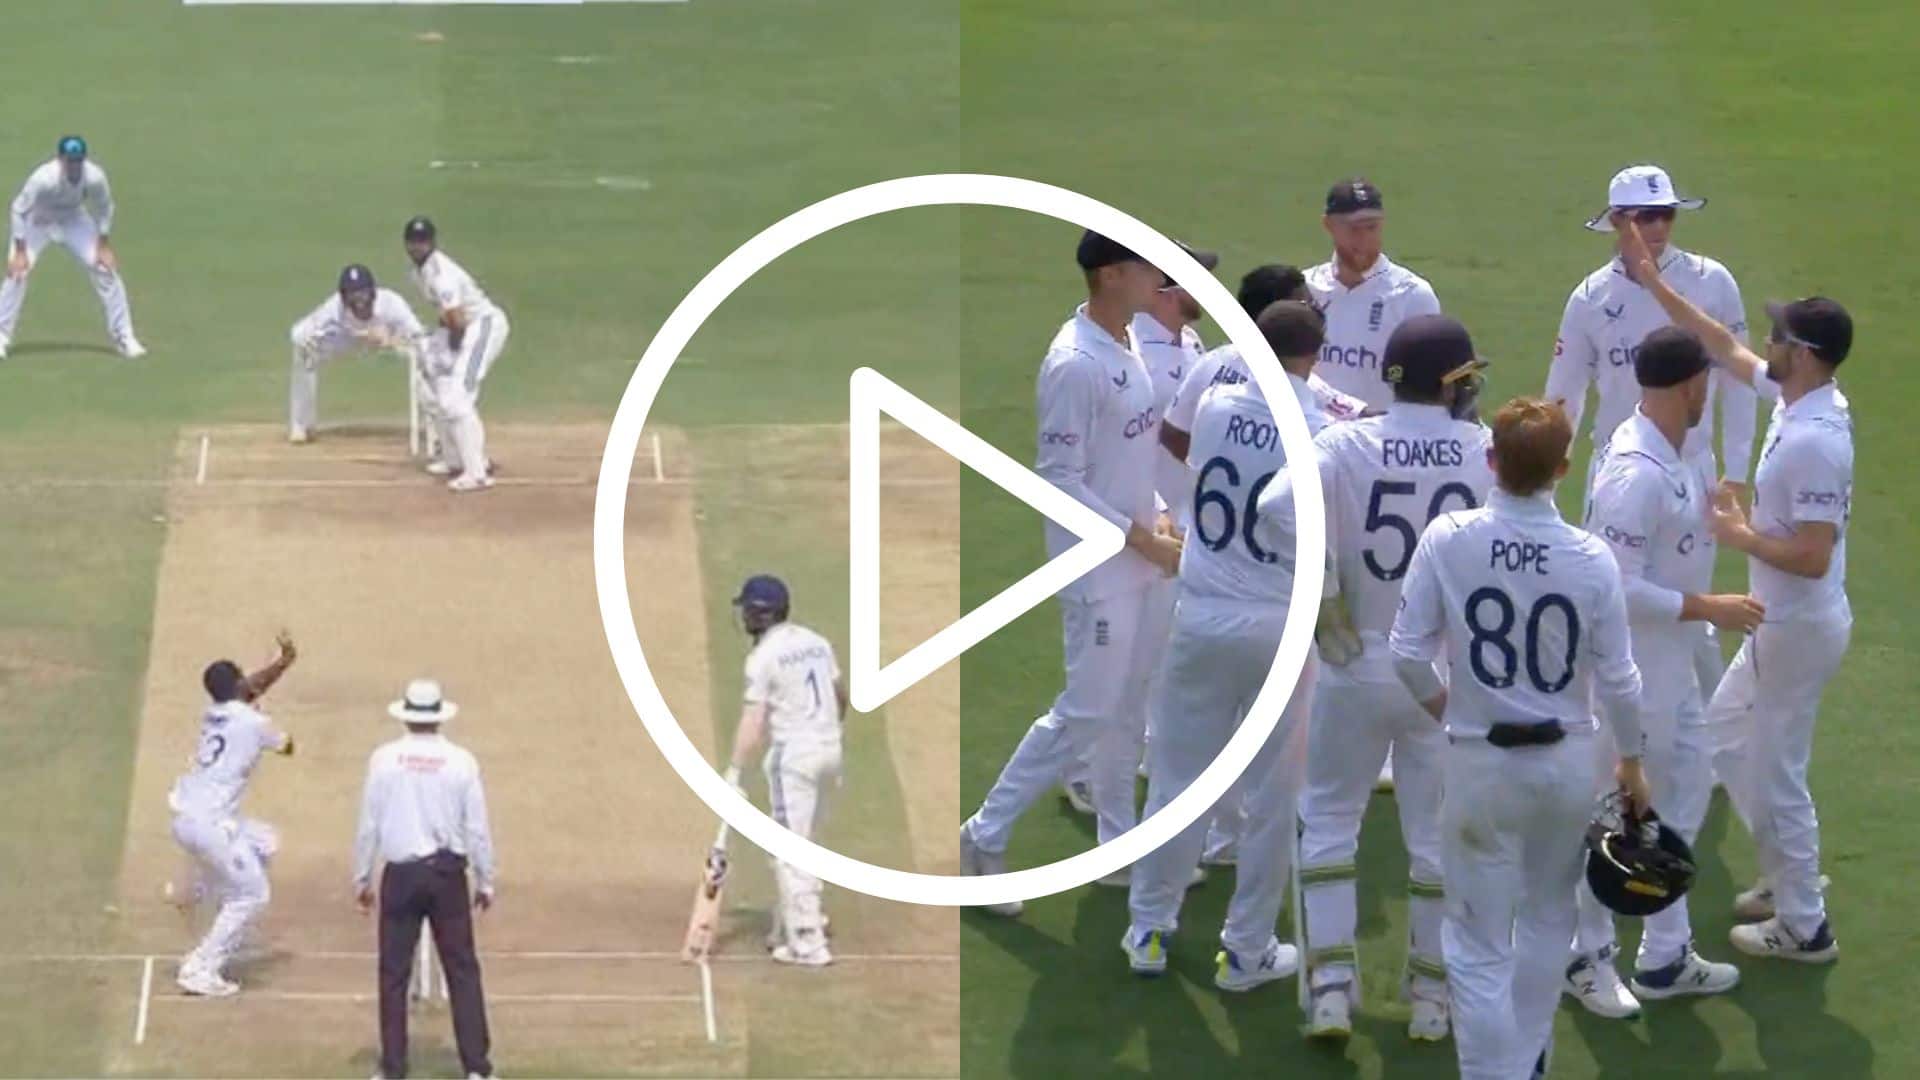 [Watch] Shreyas Iyer ‘Outfoxed’ By Rehan Ahmed’s Vicious Googly As Stokes’ Trap Succeeds